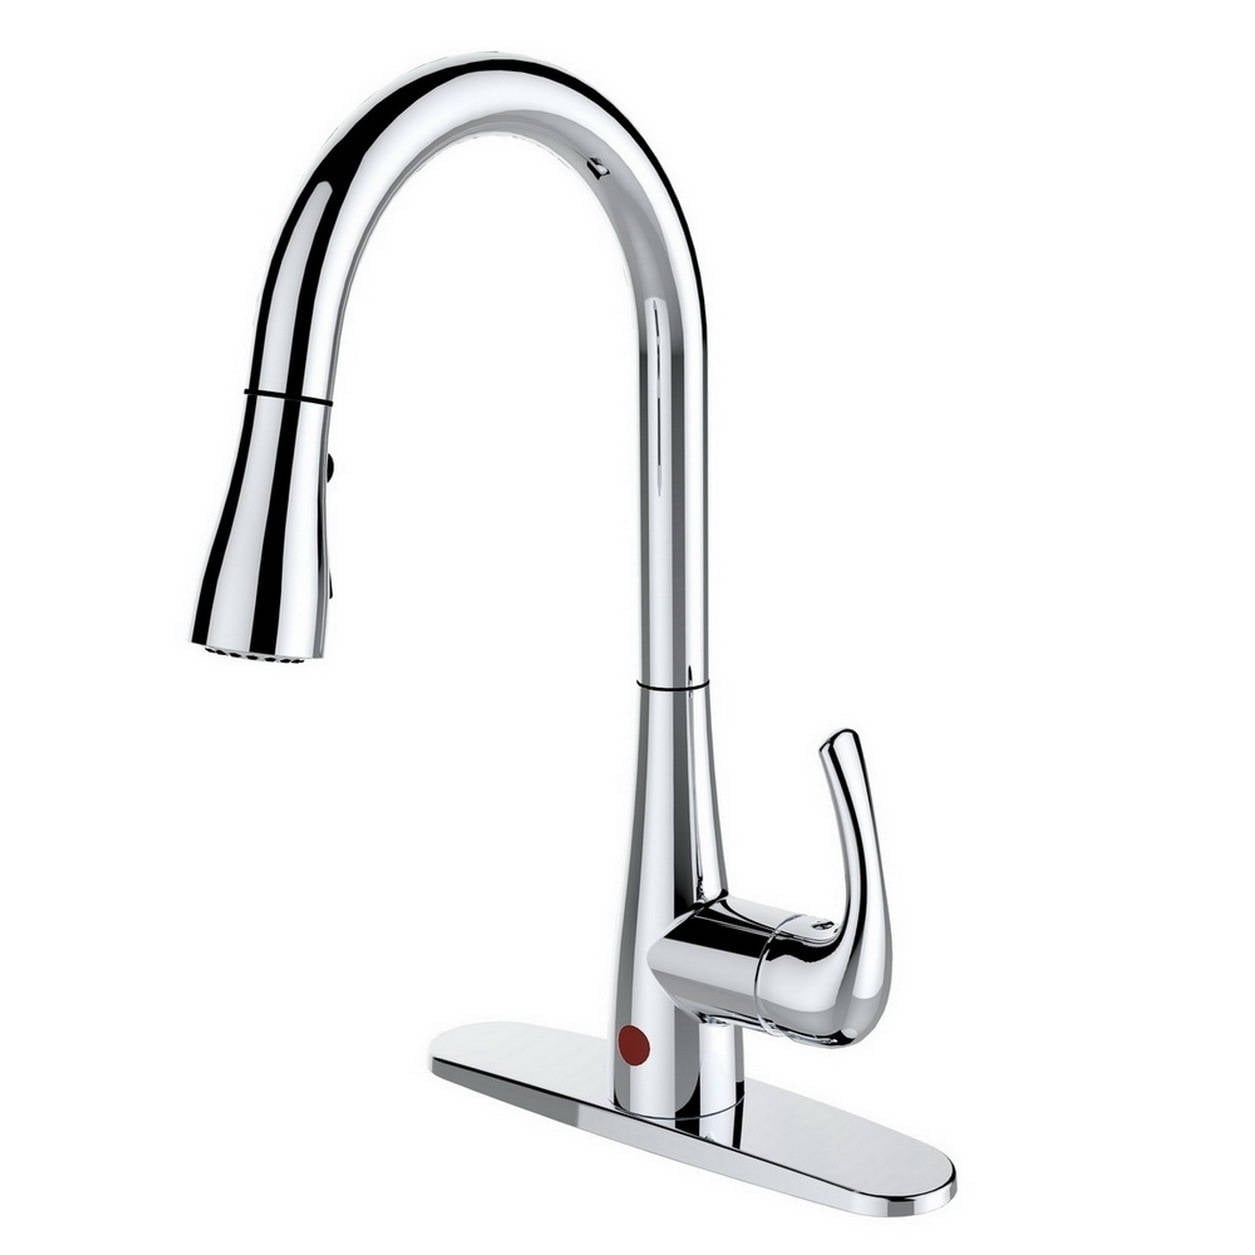 RUNFINE Single-Handle Pull-Down Sprayer With Hands-Free Kitchen Faucet Chrome - image 1 of 5